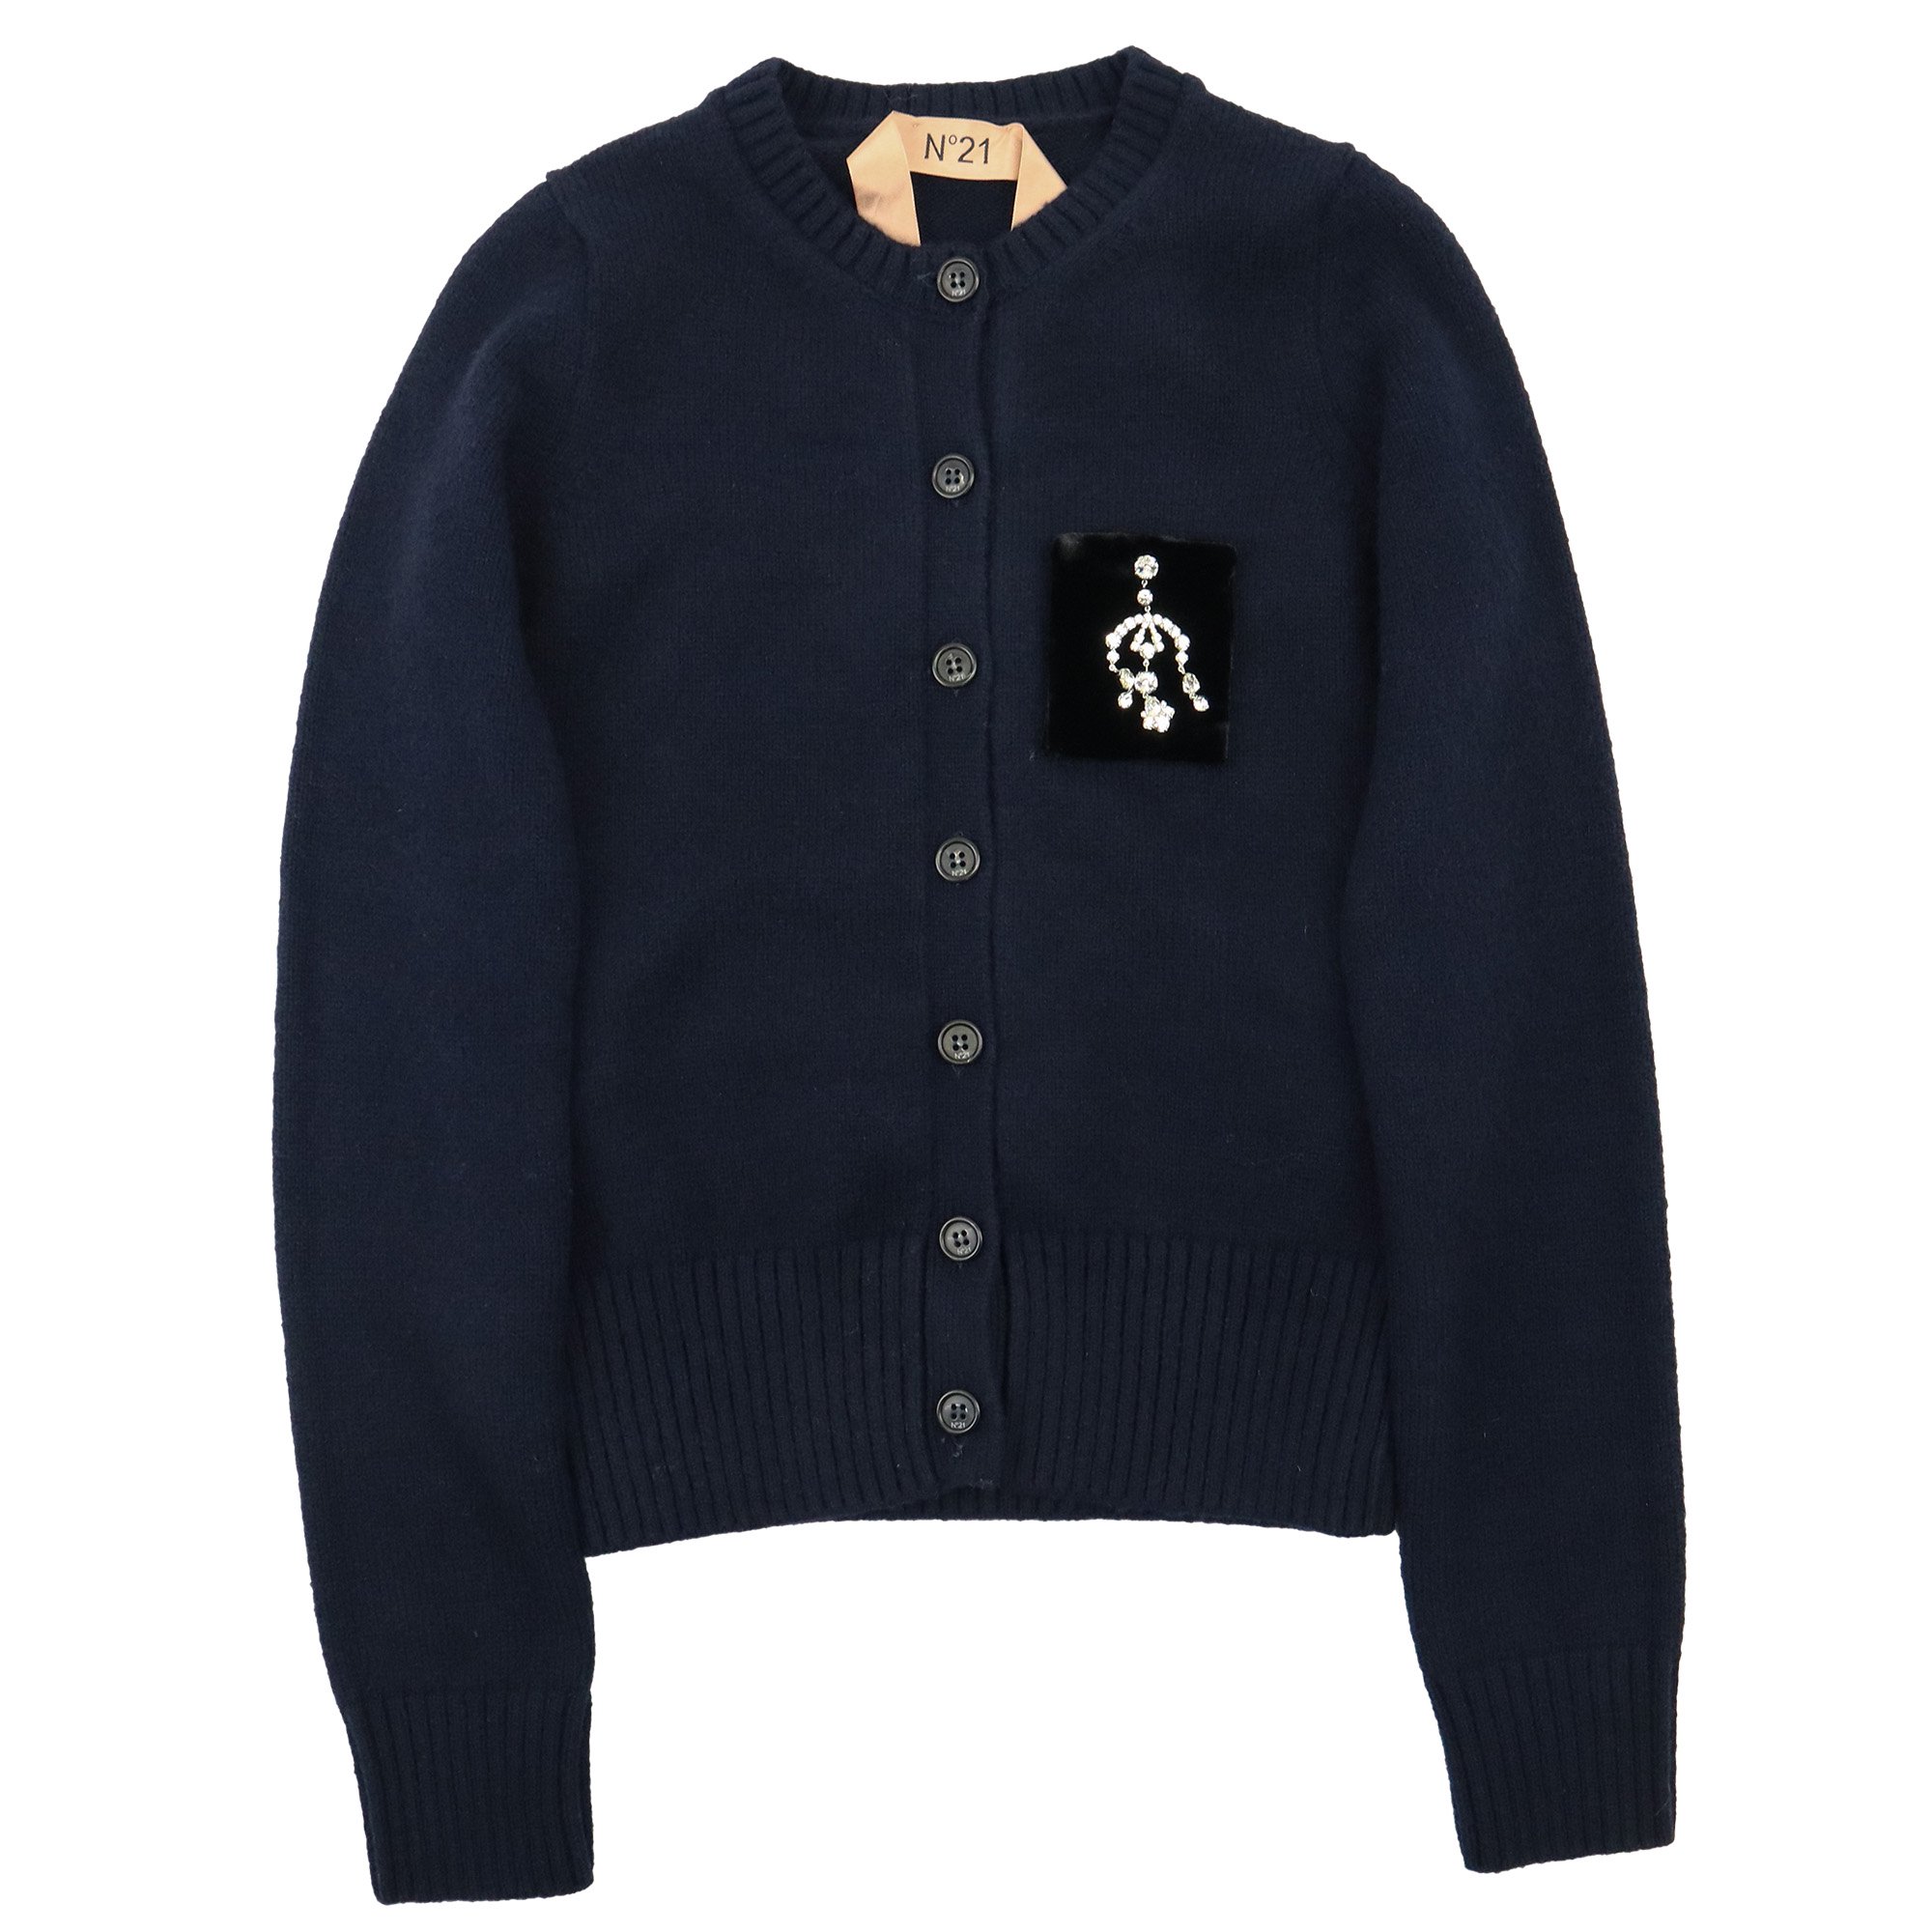 <img class='new_mark_img1' src='https://img.shop-pro.jp/img/new/icons47.gif' style='border:none;display:inline;margin:0px;padding:0px;width:auto;' />N21 L/S CARDIGAN30%OFF